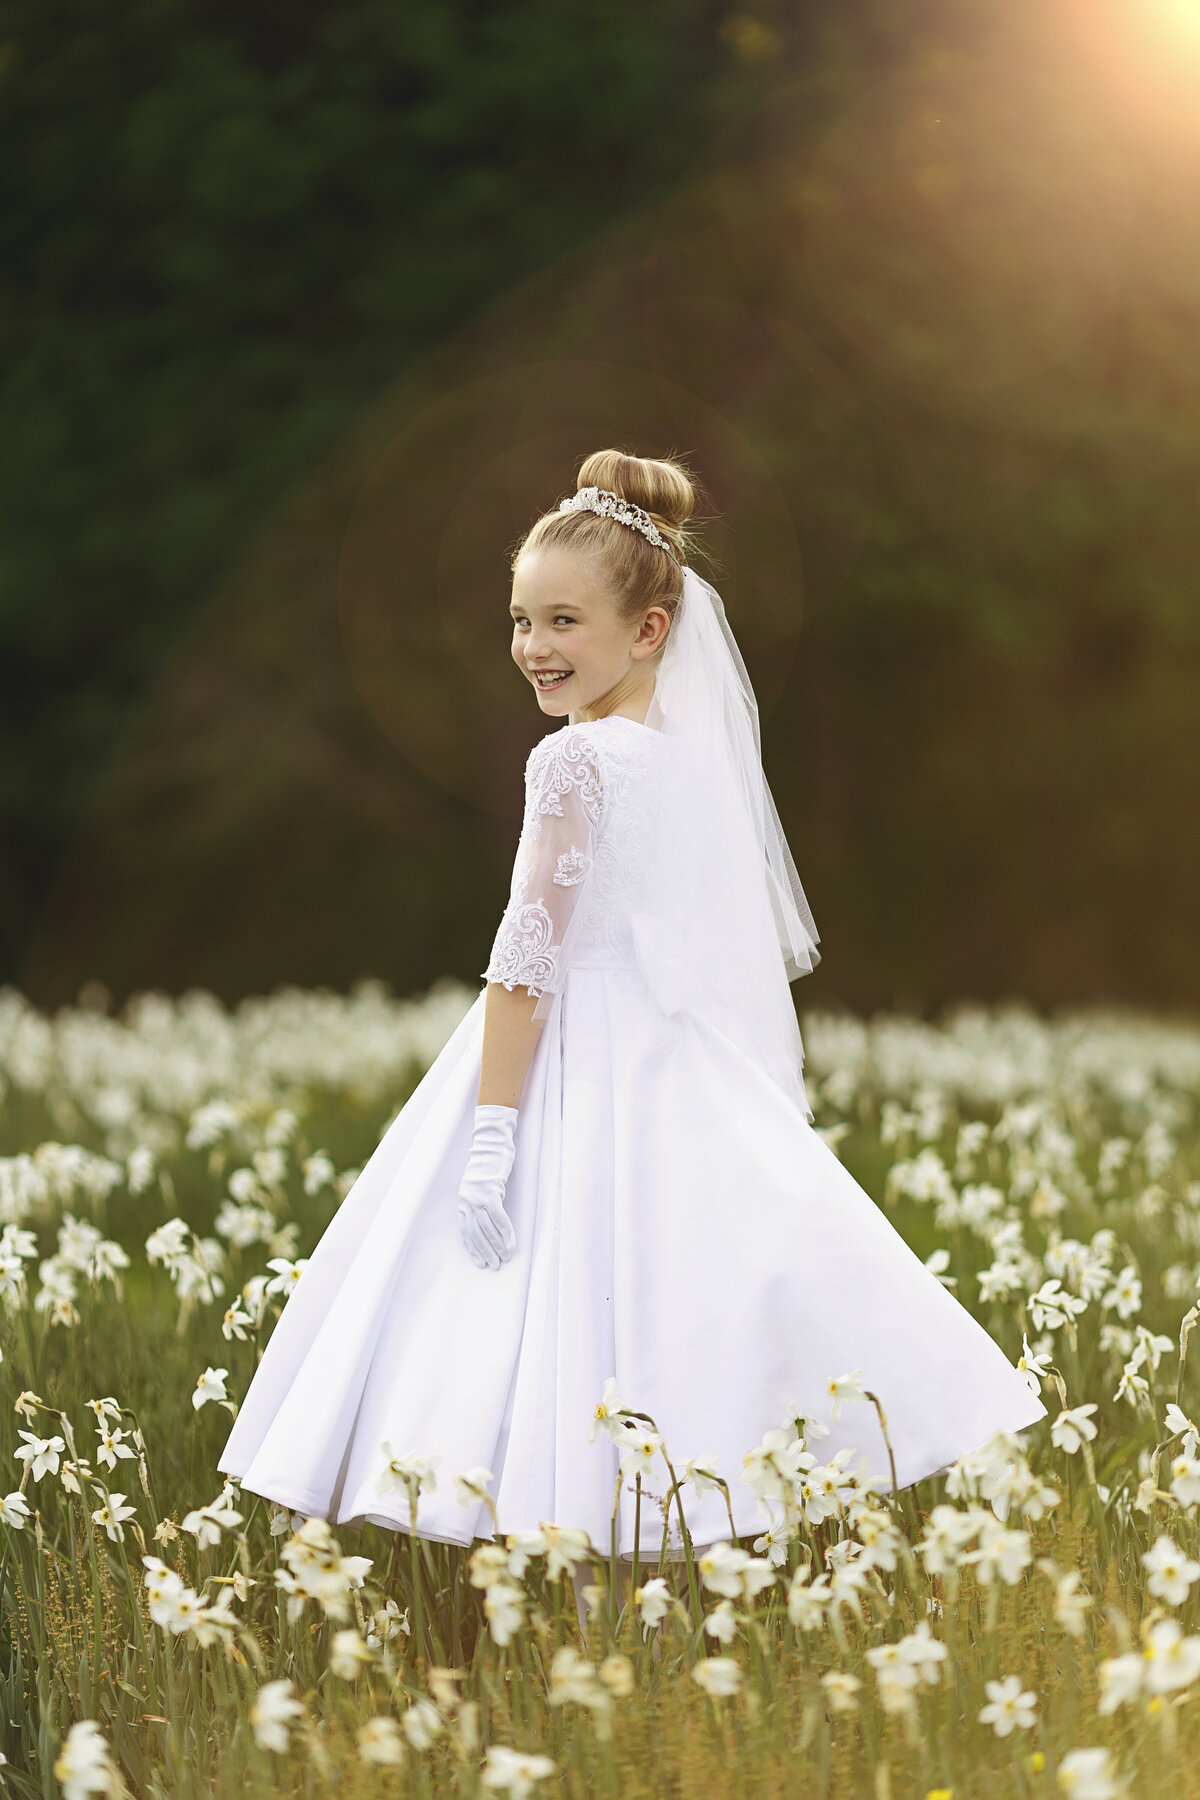 A young girl smiles over her shoulder while walking through a field of white flowers at sunset in a white dress